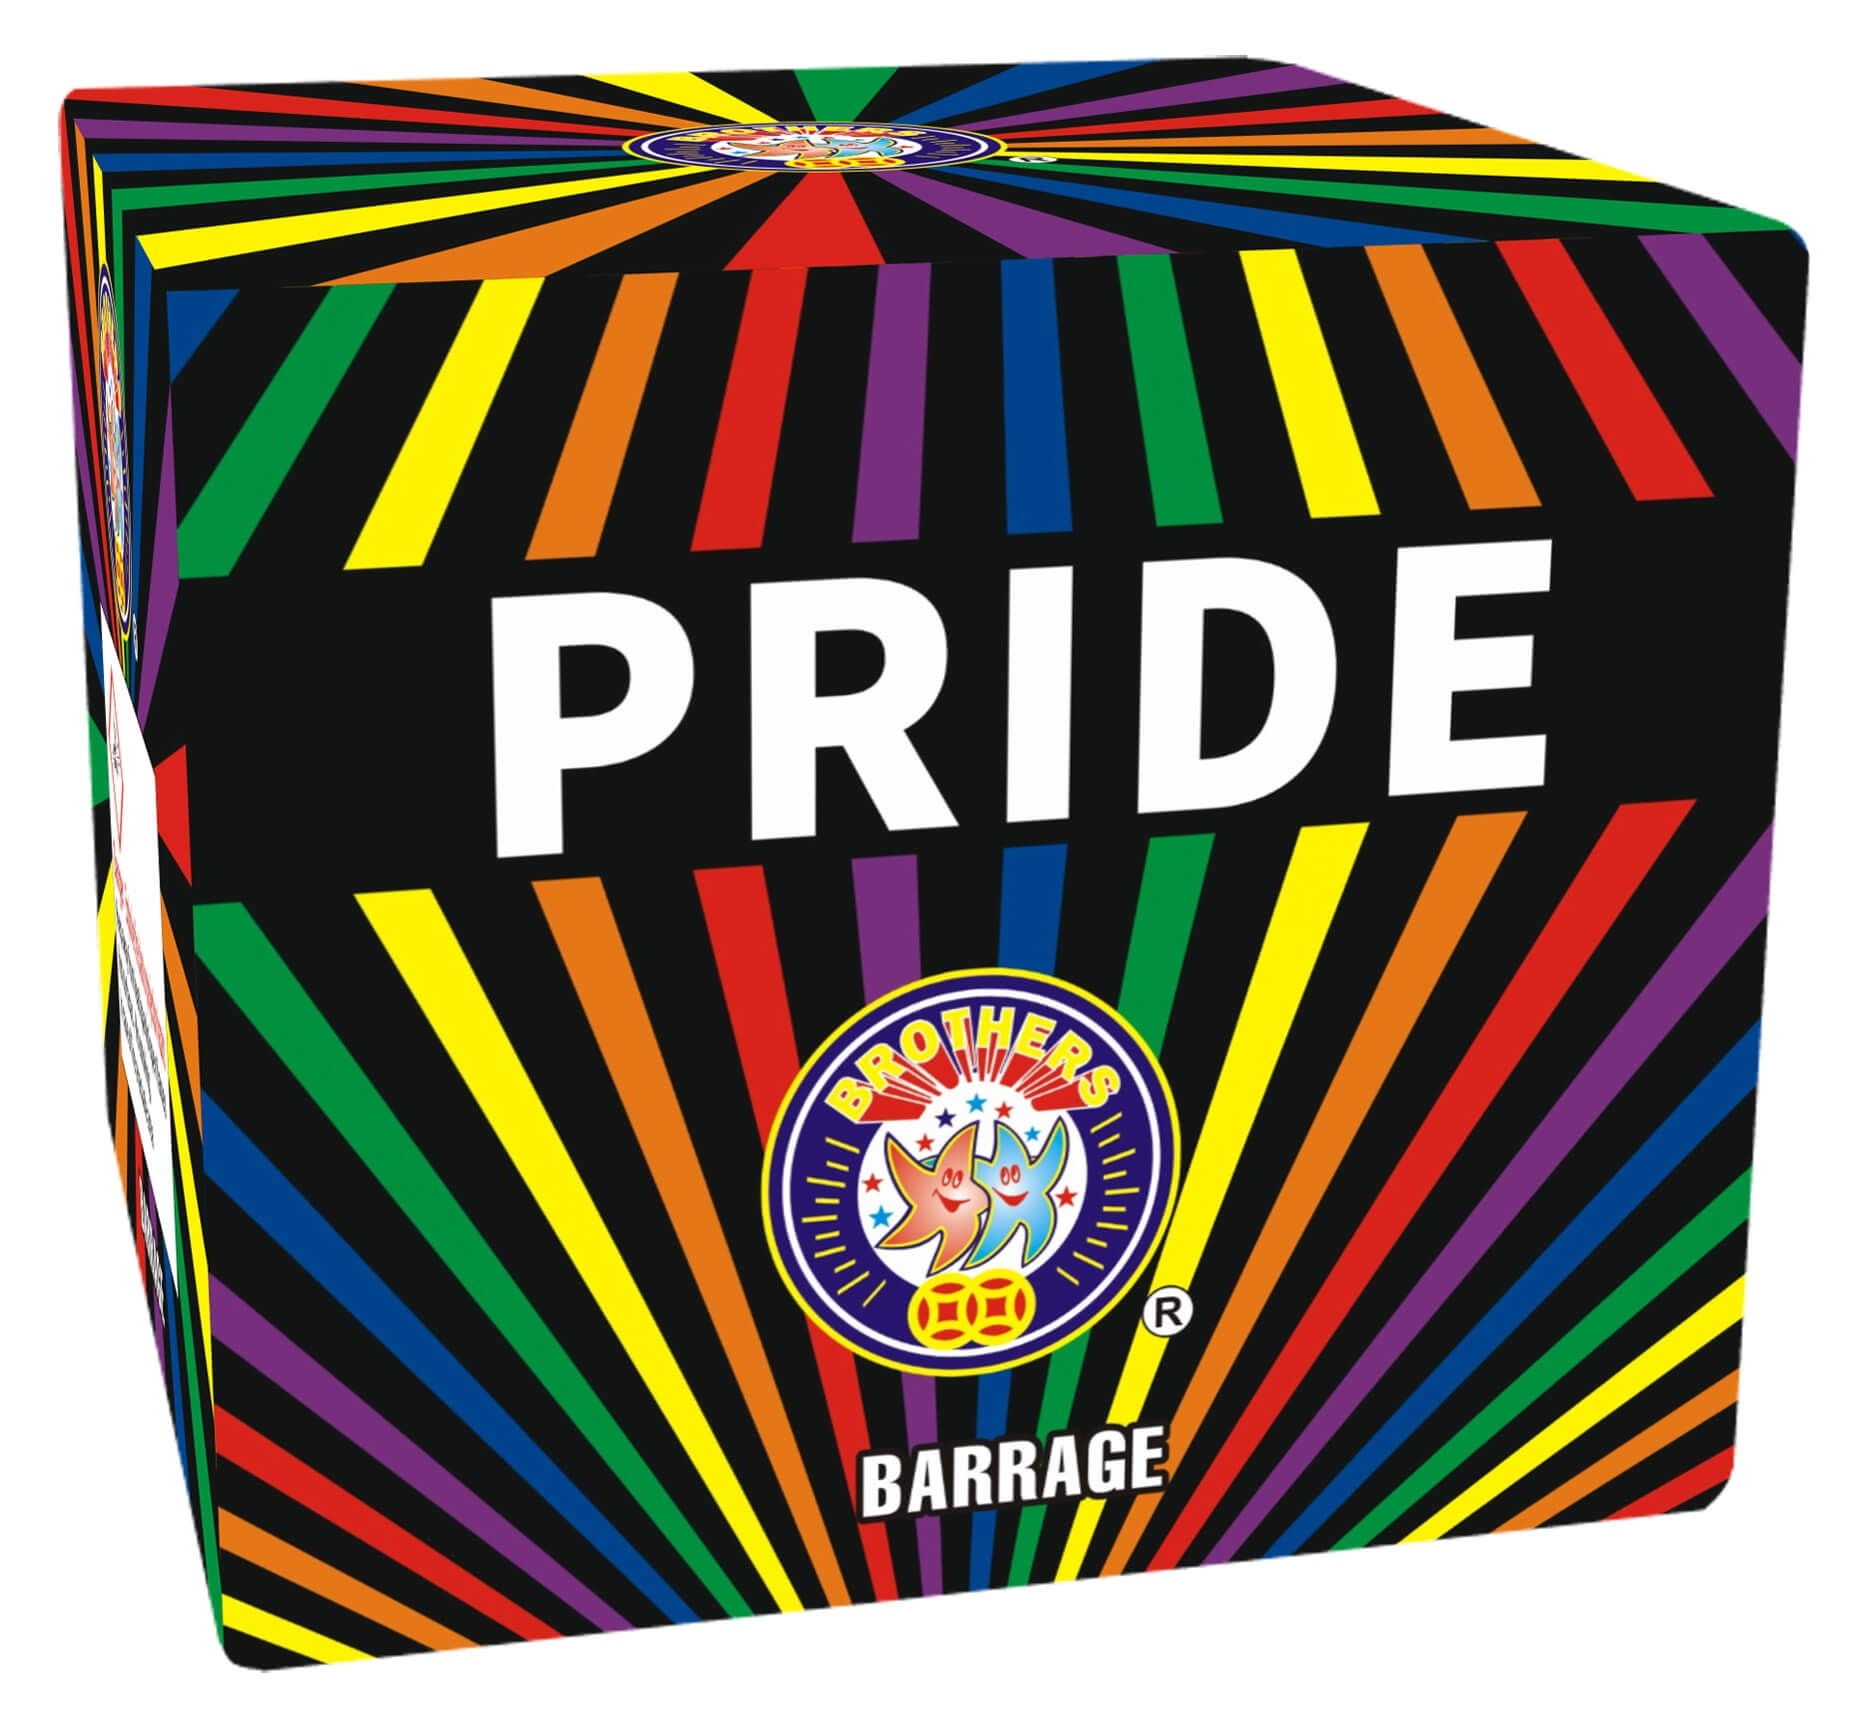 Pride Firework by Brothers Pyrotechnics available at Fireworks Kingdom